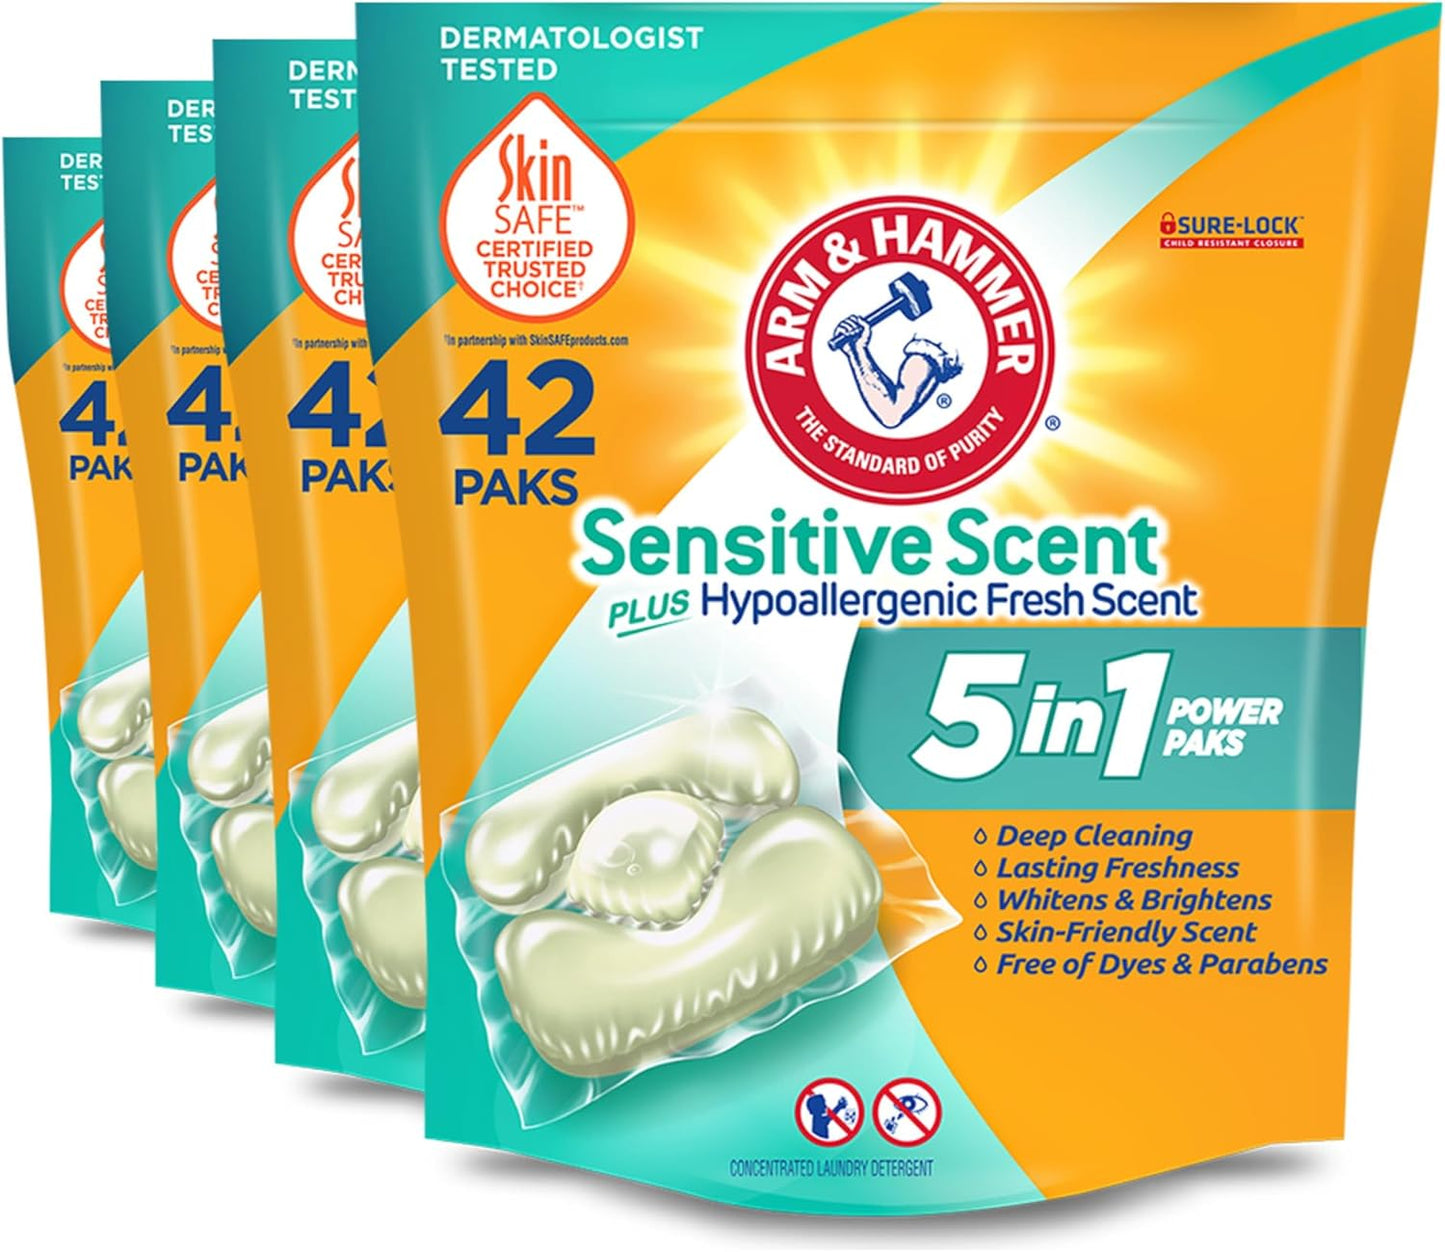 Uniites™, Arm & Hammer Sensitive Scent 5-in-1 Liquid Laundry Detergent Power Paks, High Efficiency (HE), 42 Count (Pack of 4), $37.91